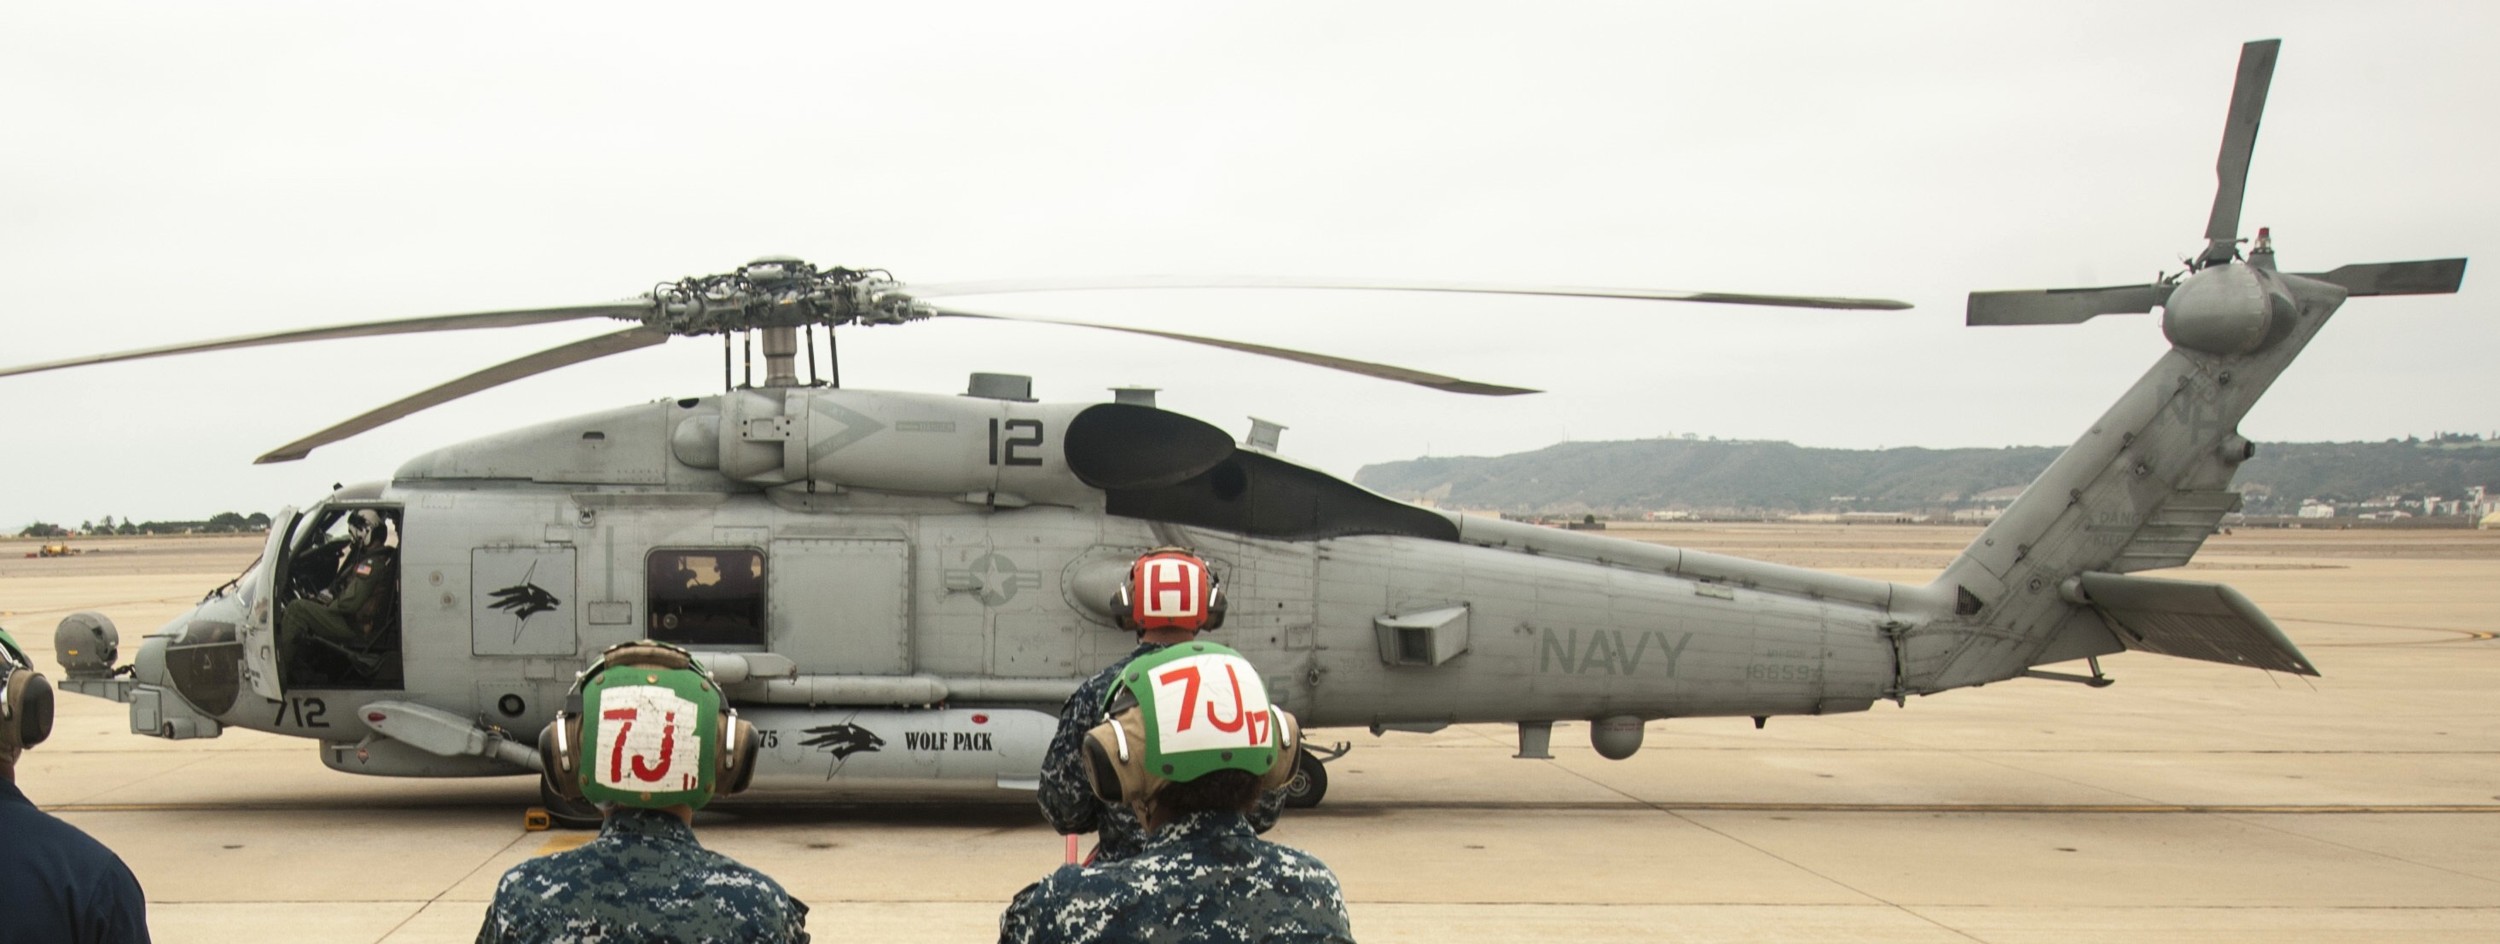 hsm-75 wolfpack helicopter maritime strike squadron us navy mh-60r seahawk 2015 50